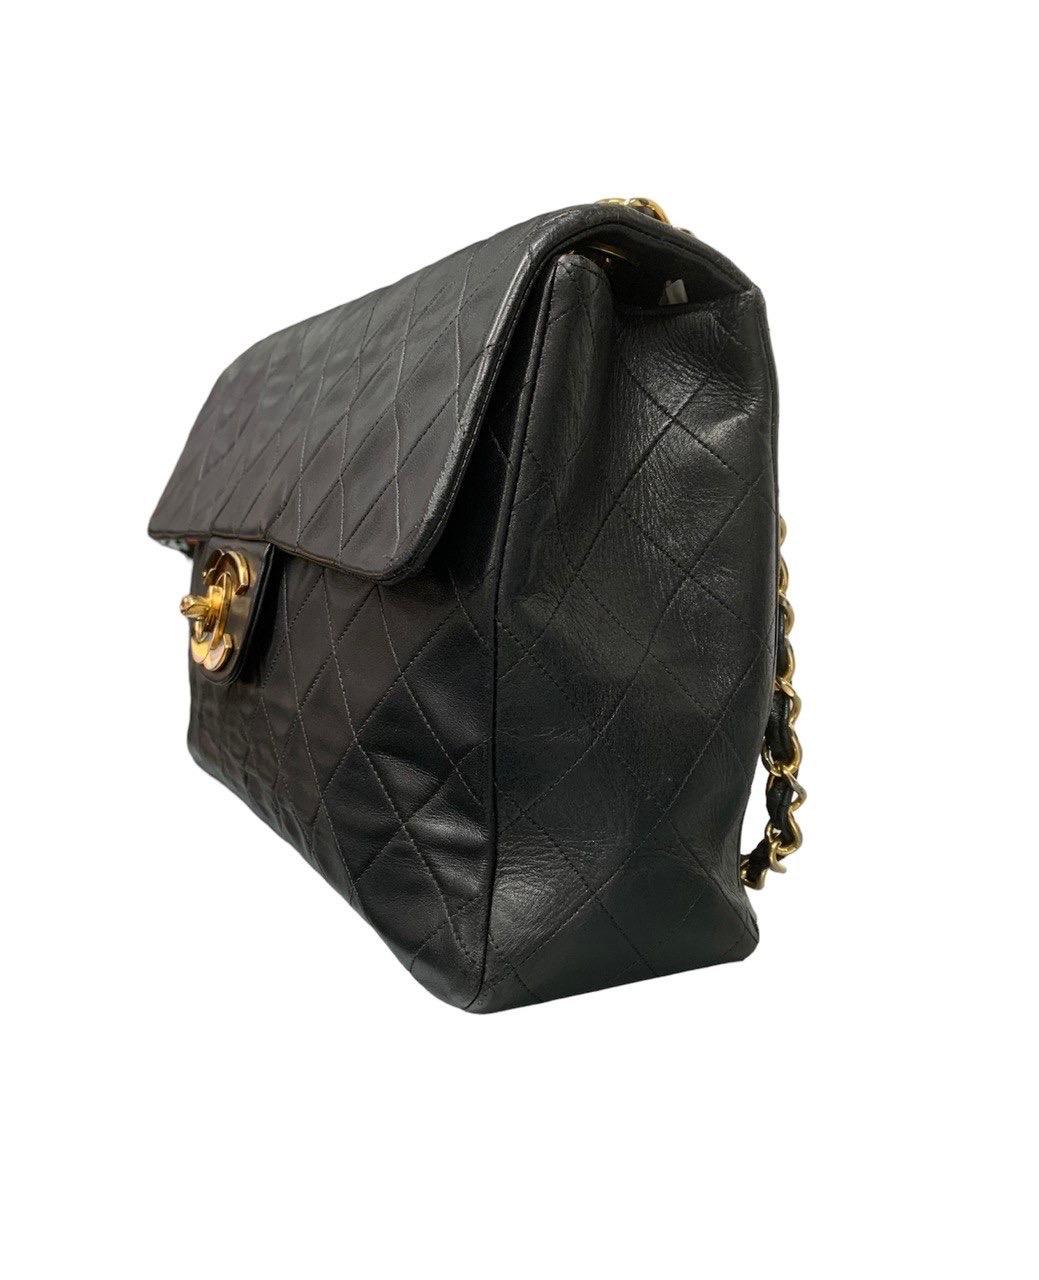 Chanel signed bag, Maxi Jumbo Vintage Big Logo model in black quilted leather with golden hardware.

It features an adjustable shoulder strap in gold-colored chain intertwined with a layer of black leather, to wear the bag on the shoulder or